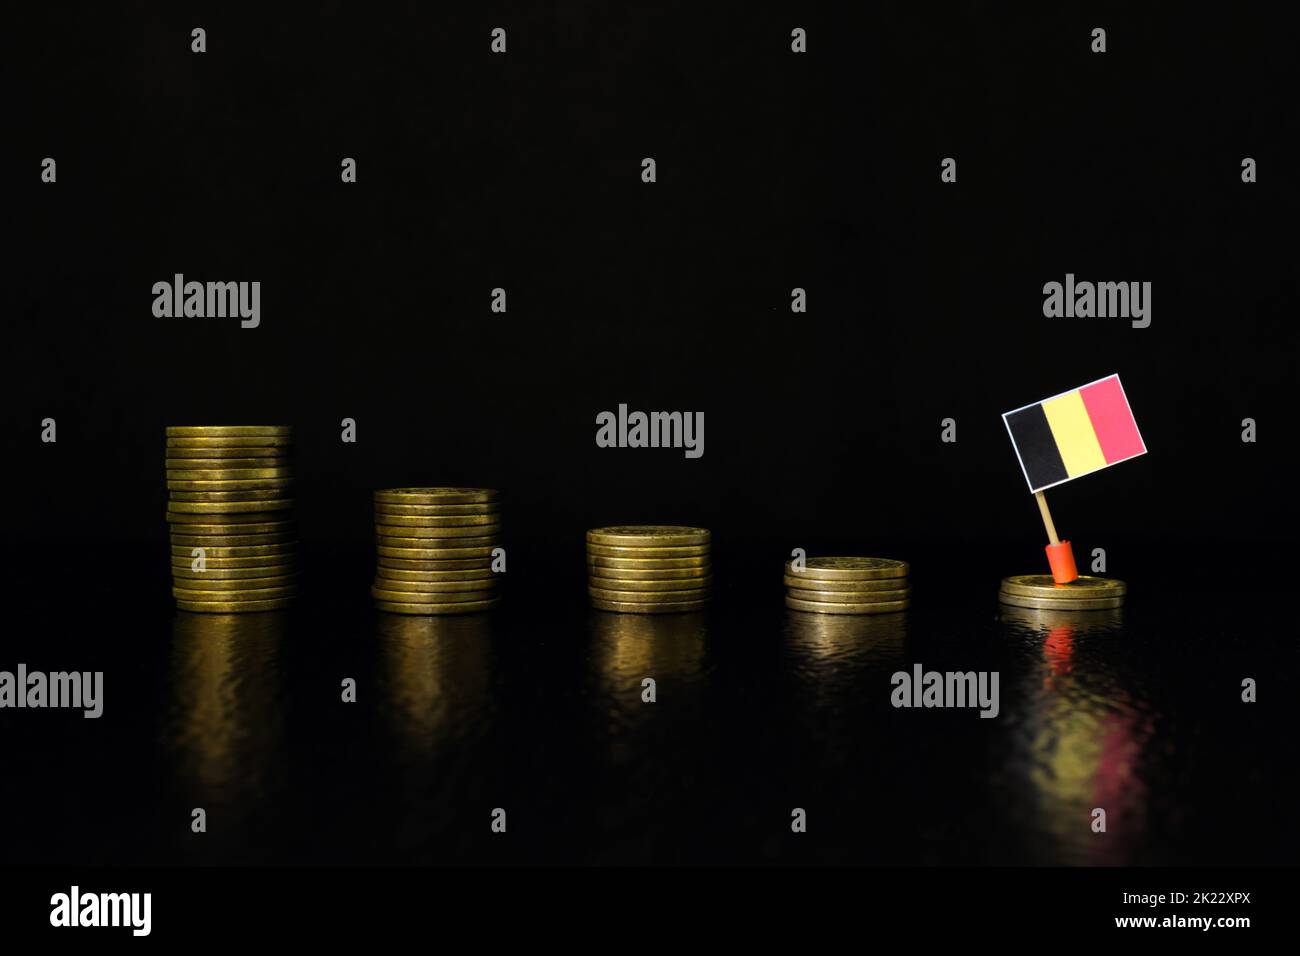 Belgium economic recession, financial crisis and currency depreciation concept. Belgian flag in decreasing stack of coins in dark black background. Stock Photo